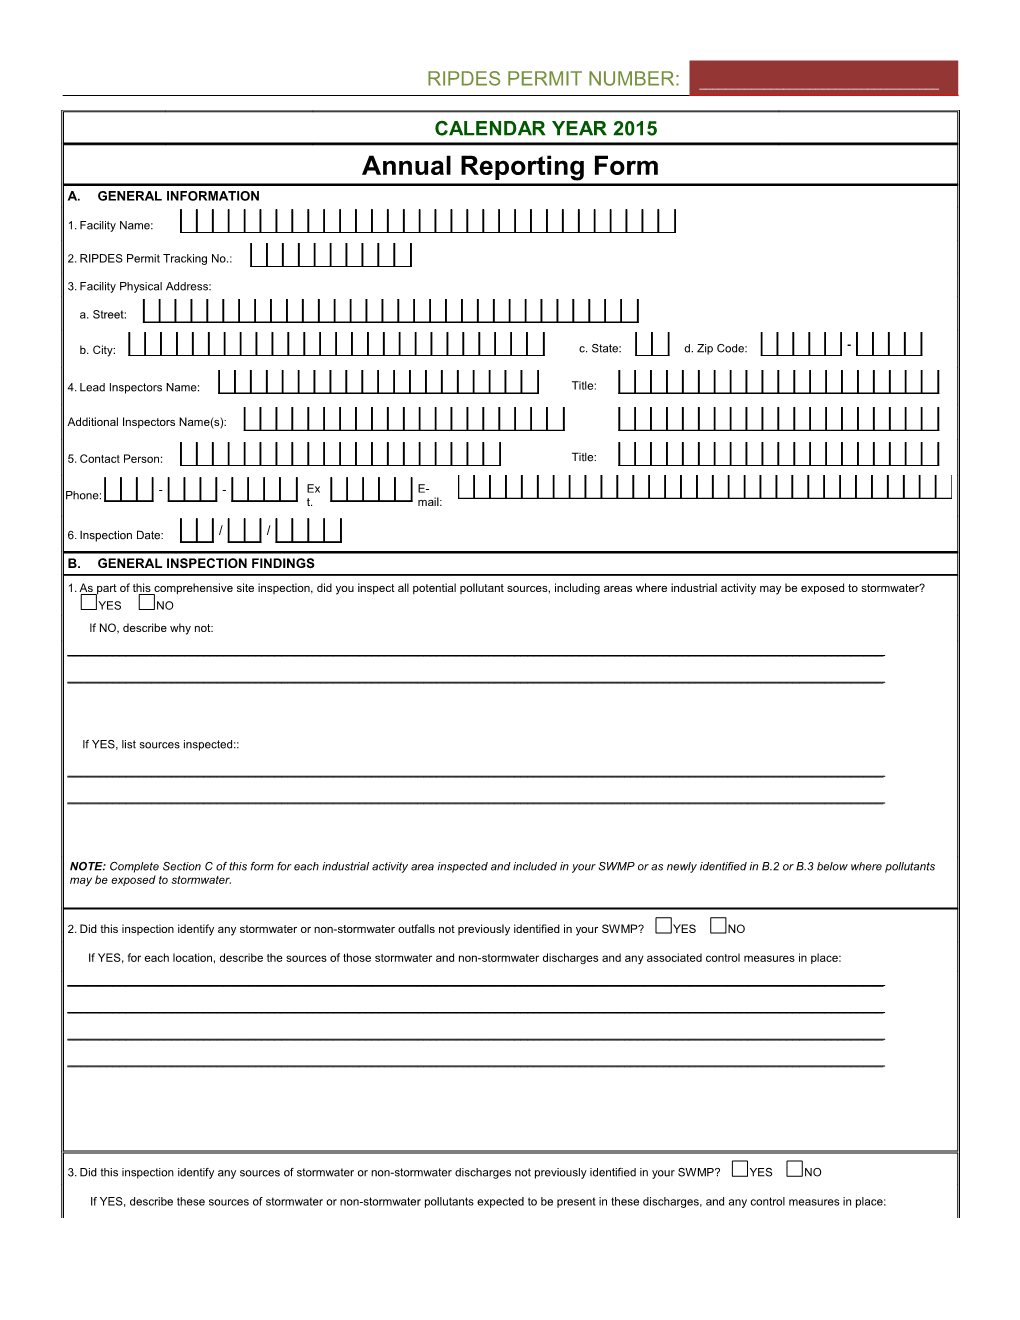 This Form Replaces Form 35109 (8-98)Refer to the Following Pages for Instructions s1